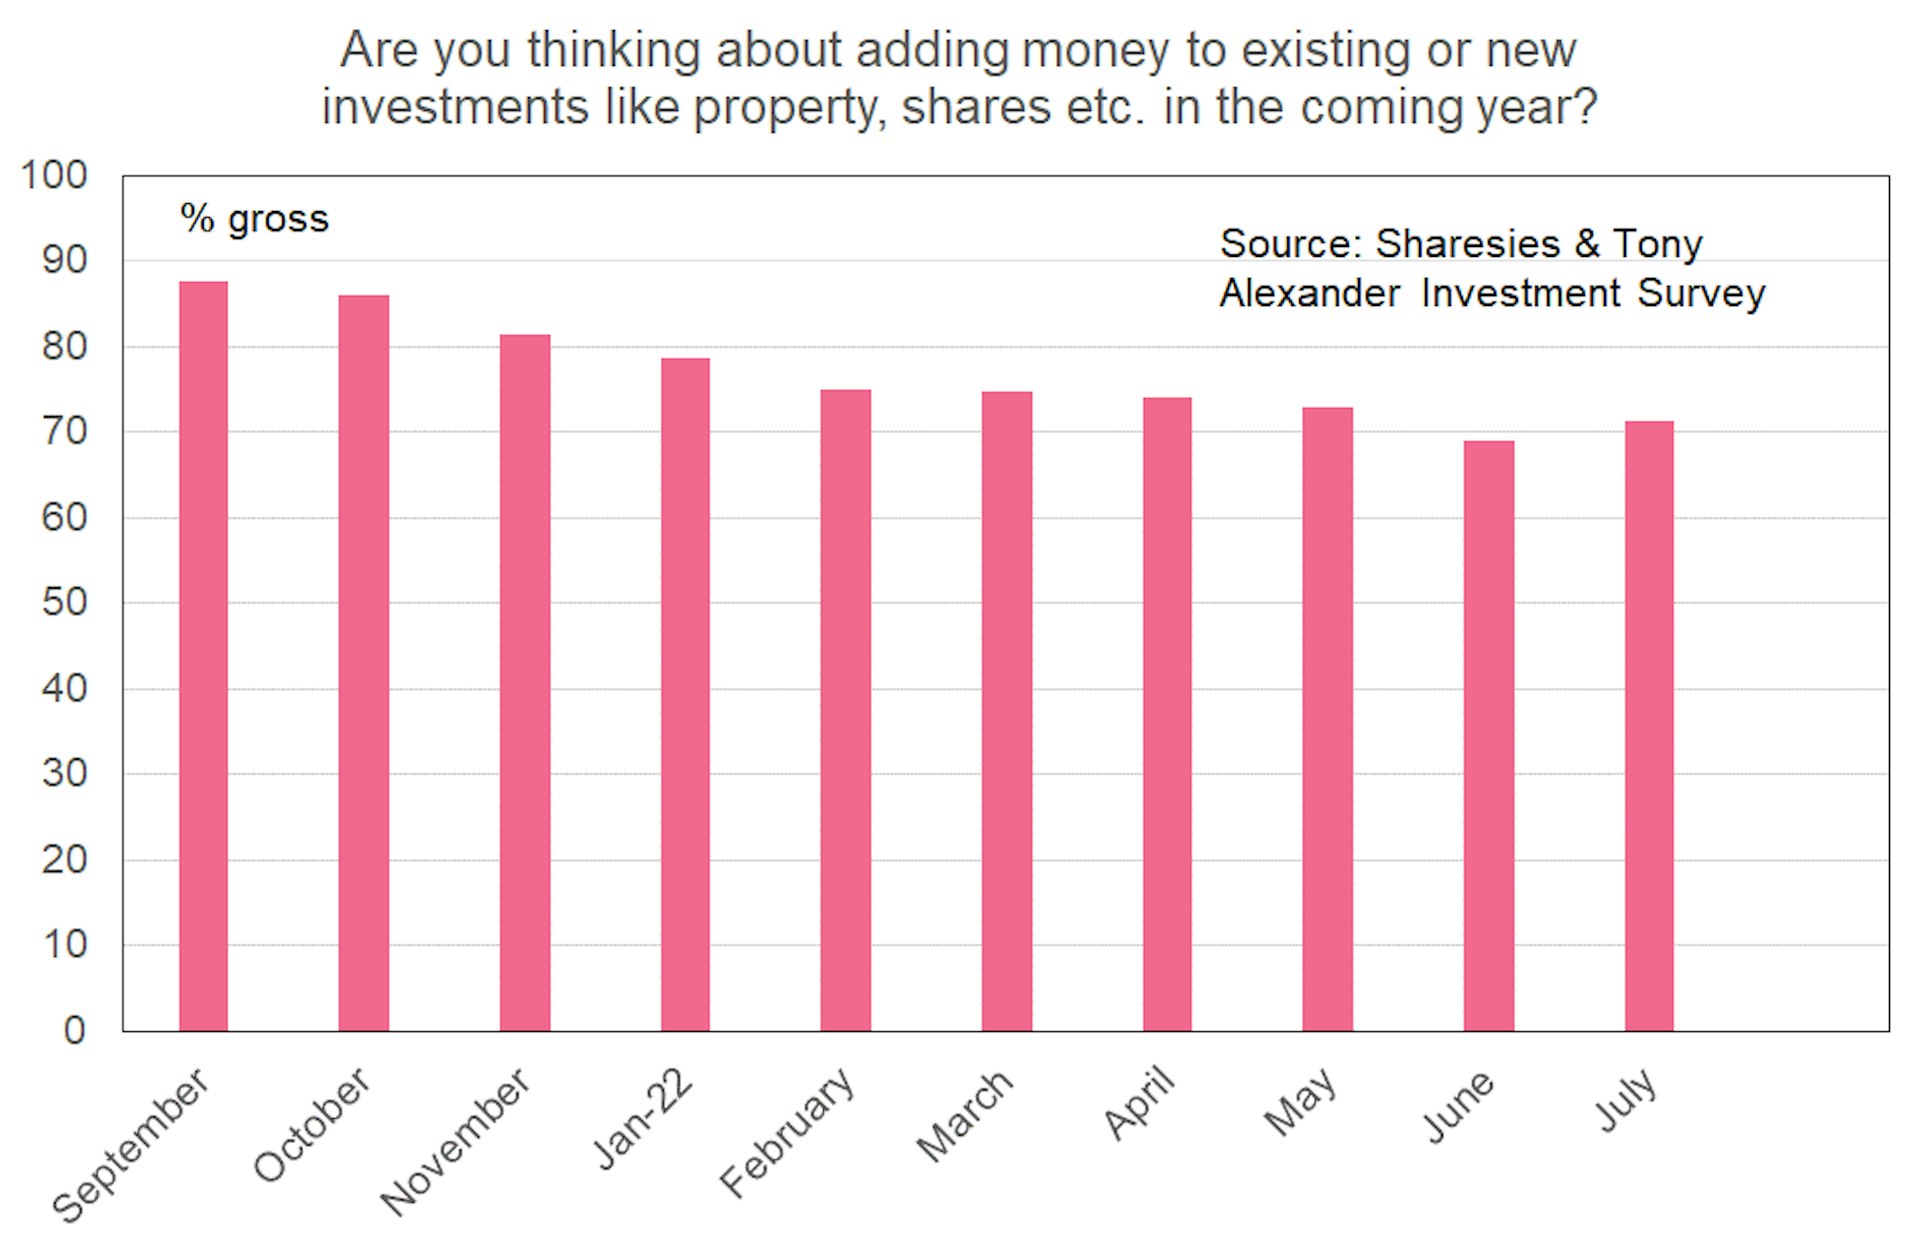 A bar graph showing response to 'are you thinking about adding money to existing or new investments like property, shares etc. in the coming year'? Responses fall from 88% saying 'yes' in September 2021 to 69% in June 2022, before rising to 71% in July 2022. 